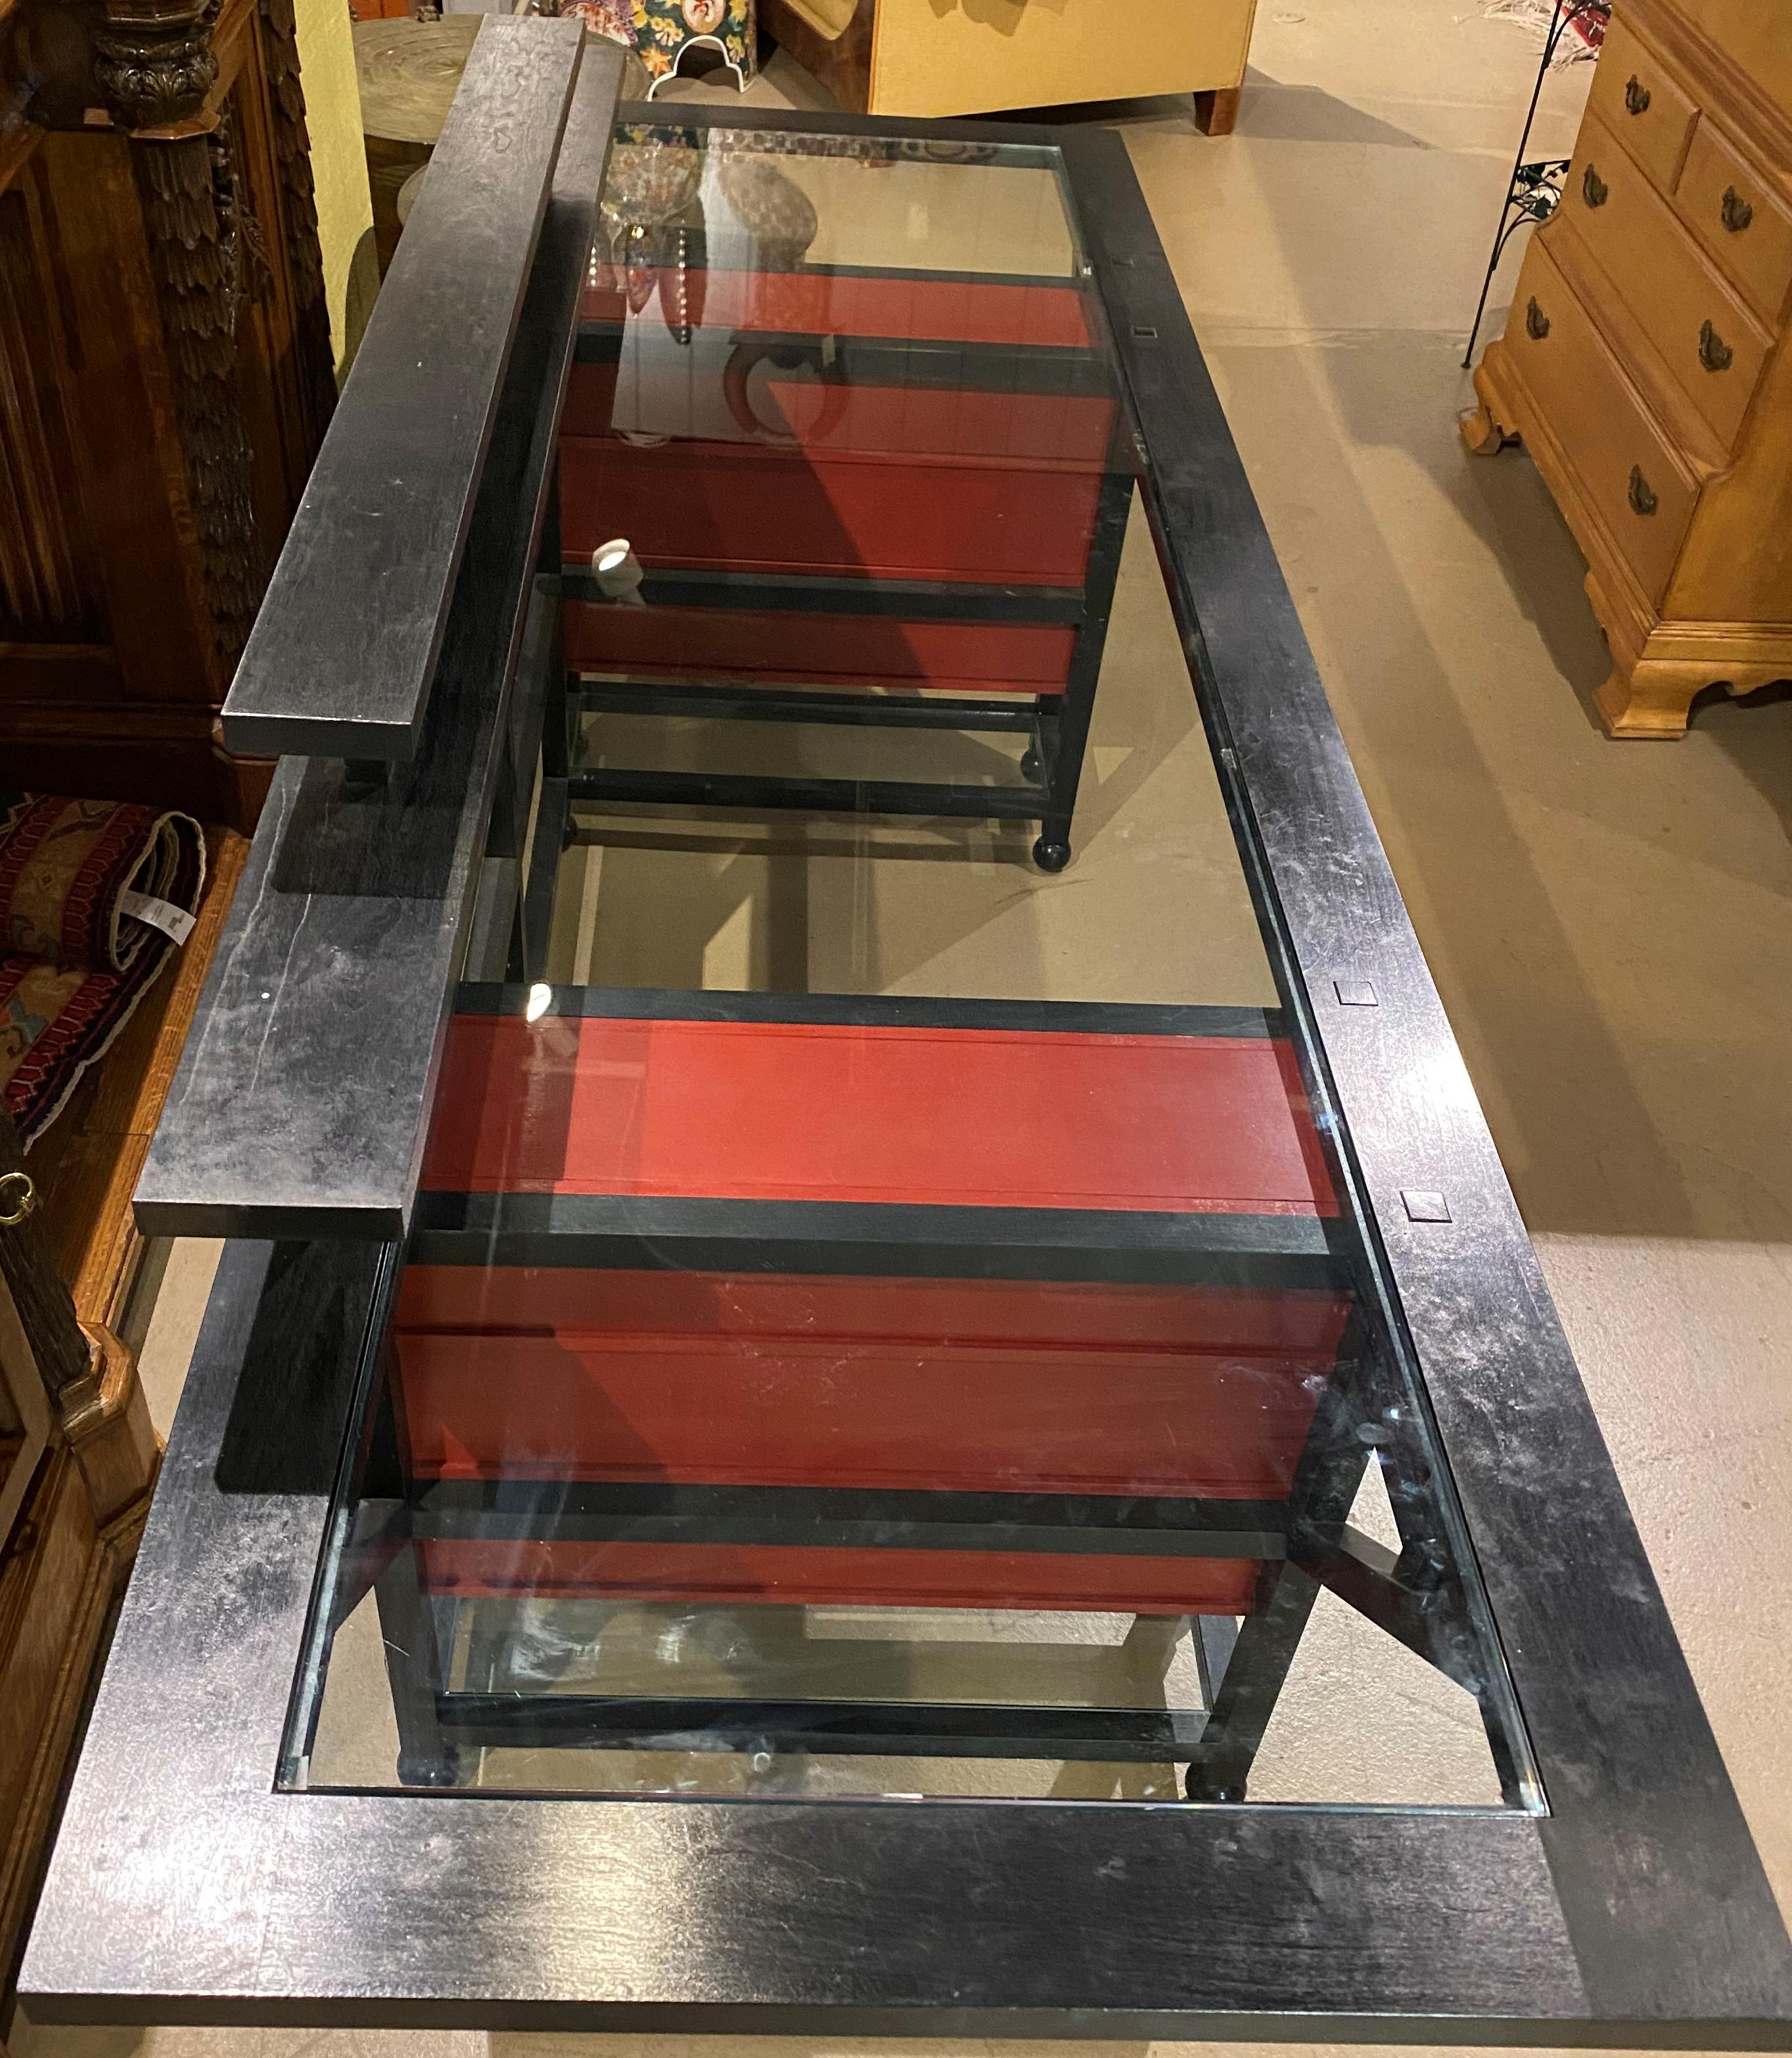 A beautiful form custom Aesthetic design desk or server in cherry wood and glass top, with ebonized frame, supported by two red painted pedestal bases, each with three drawers and brass teardrop pulls. The desk was made by Dublin, NH furniture maker